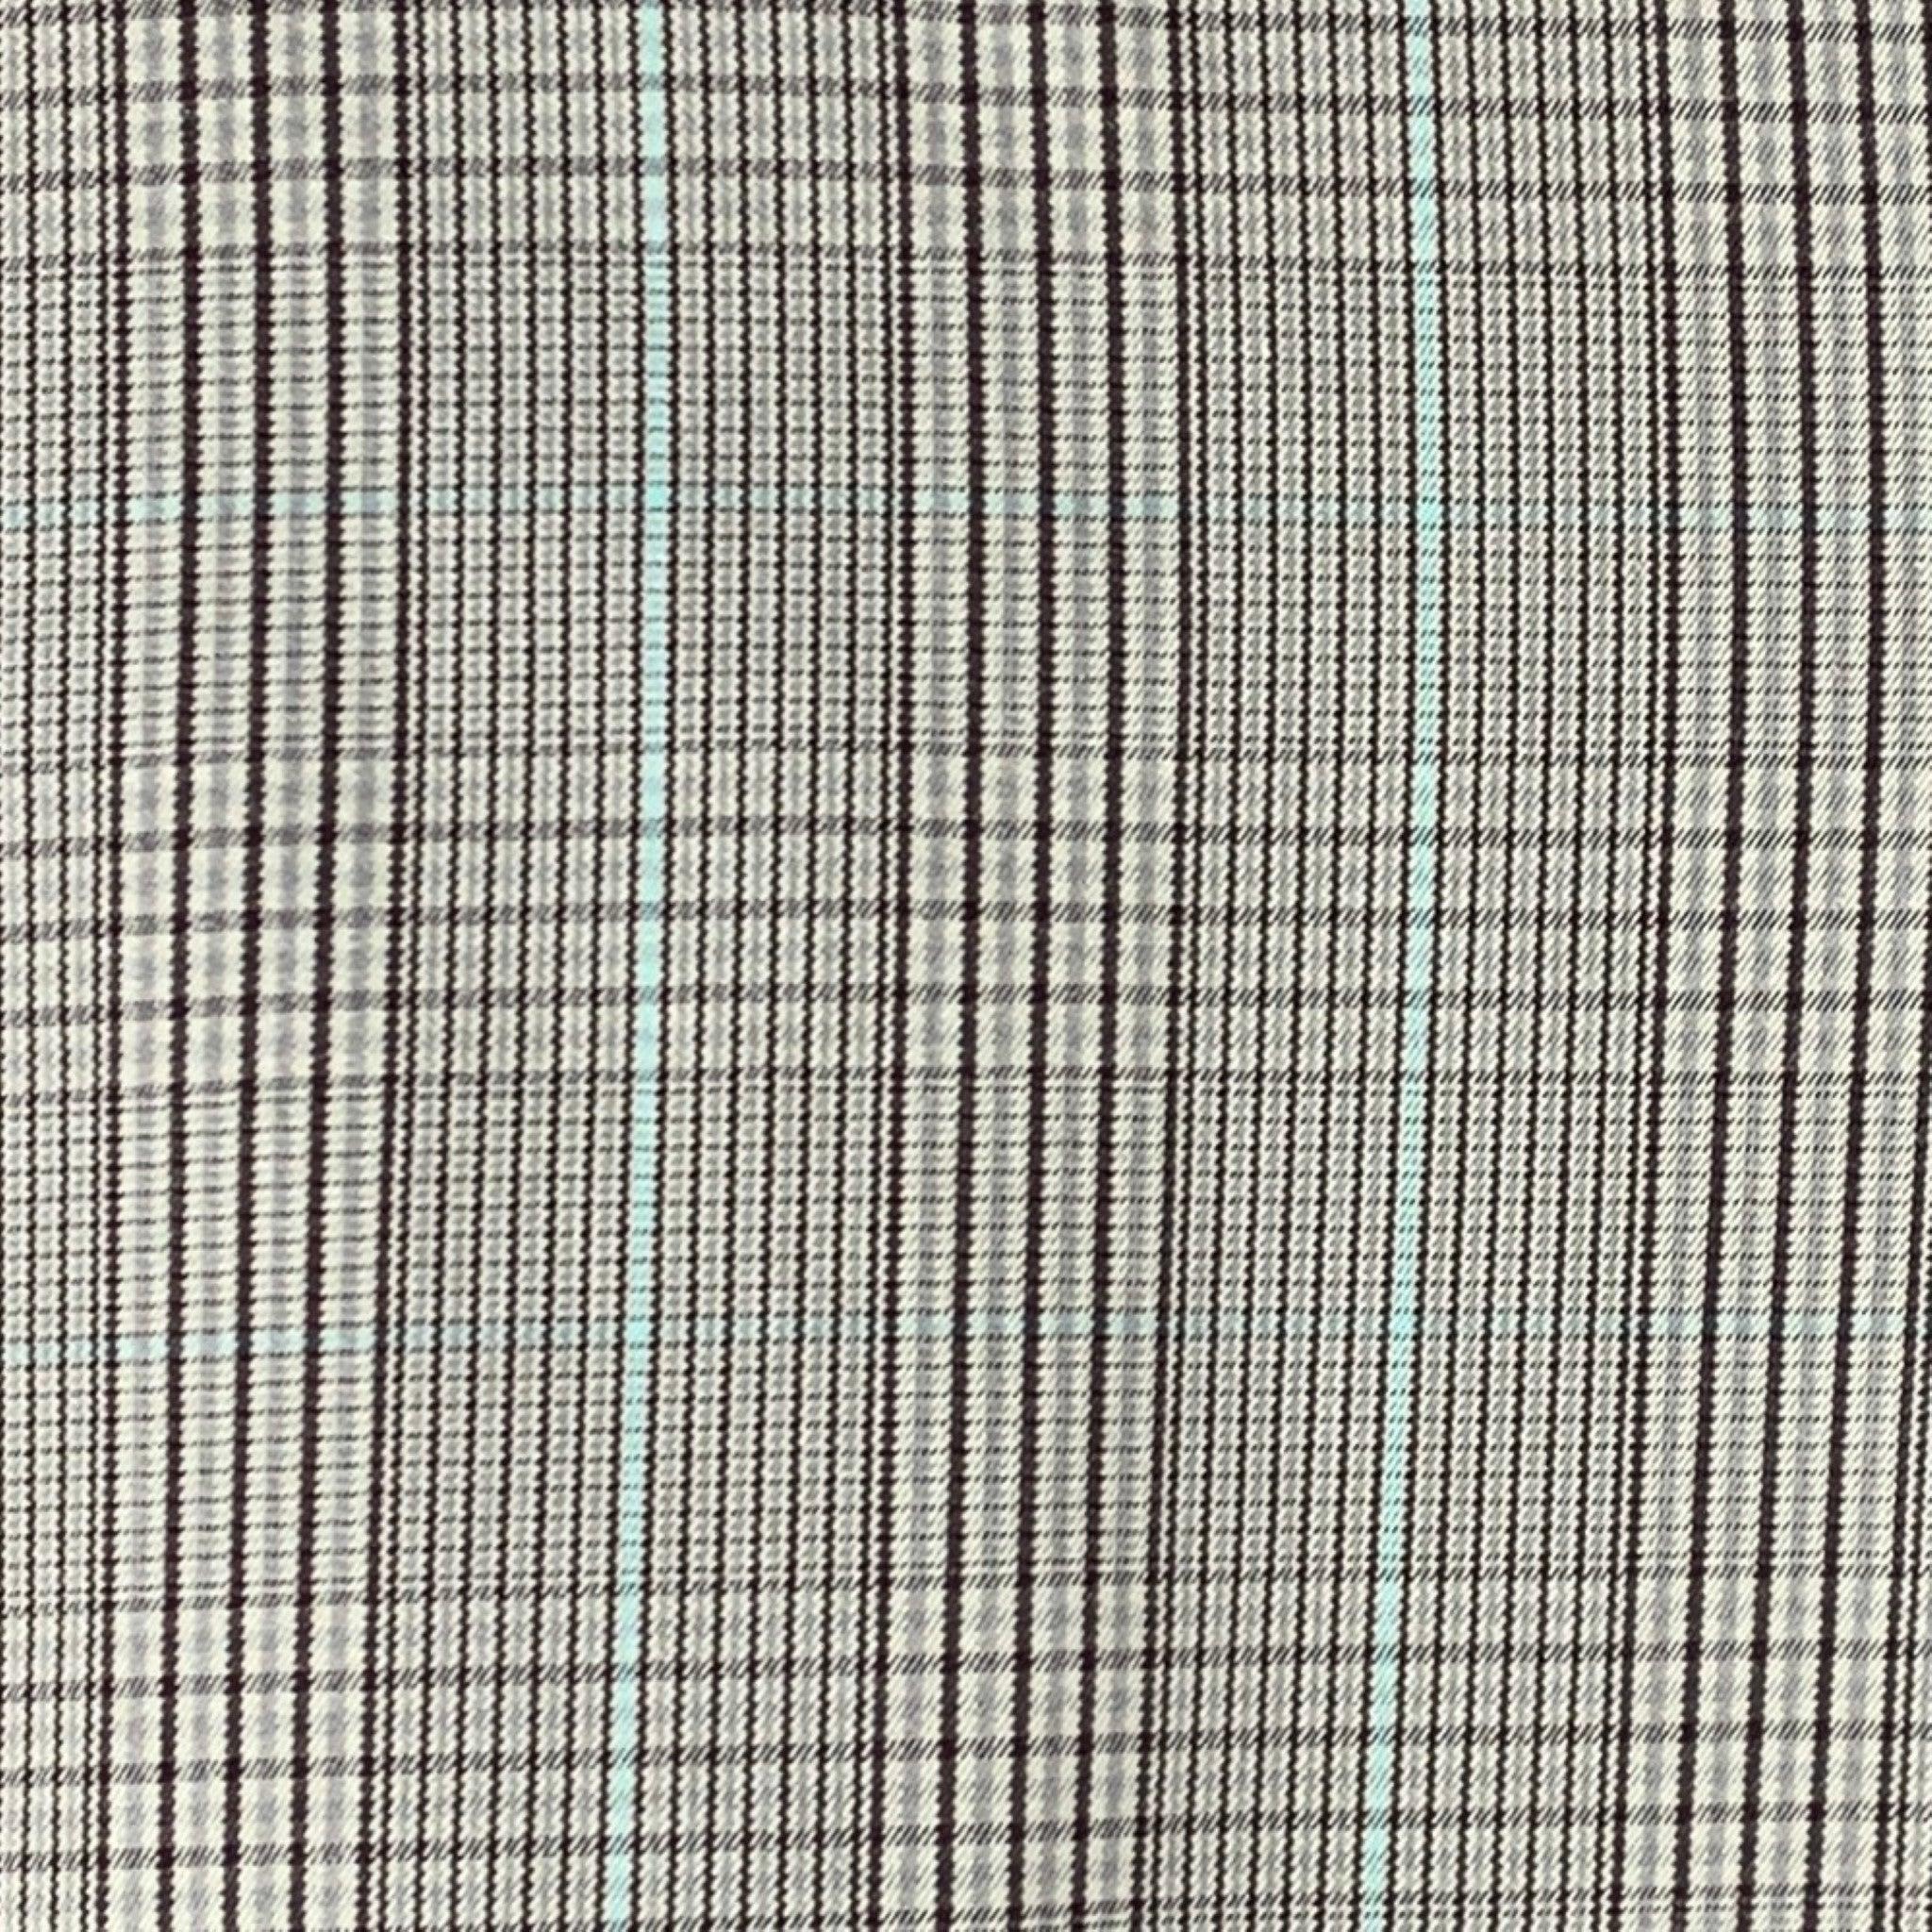 PS by PAUL SMITH
dress pants in a beige cotton fabric featuring brown and blue plaid pattern, flat front style, and zipper closure. Made in Italy.Excellent Pre-Owned Condition. 

Marked:  36